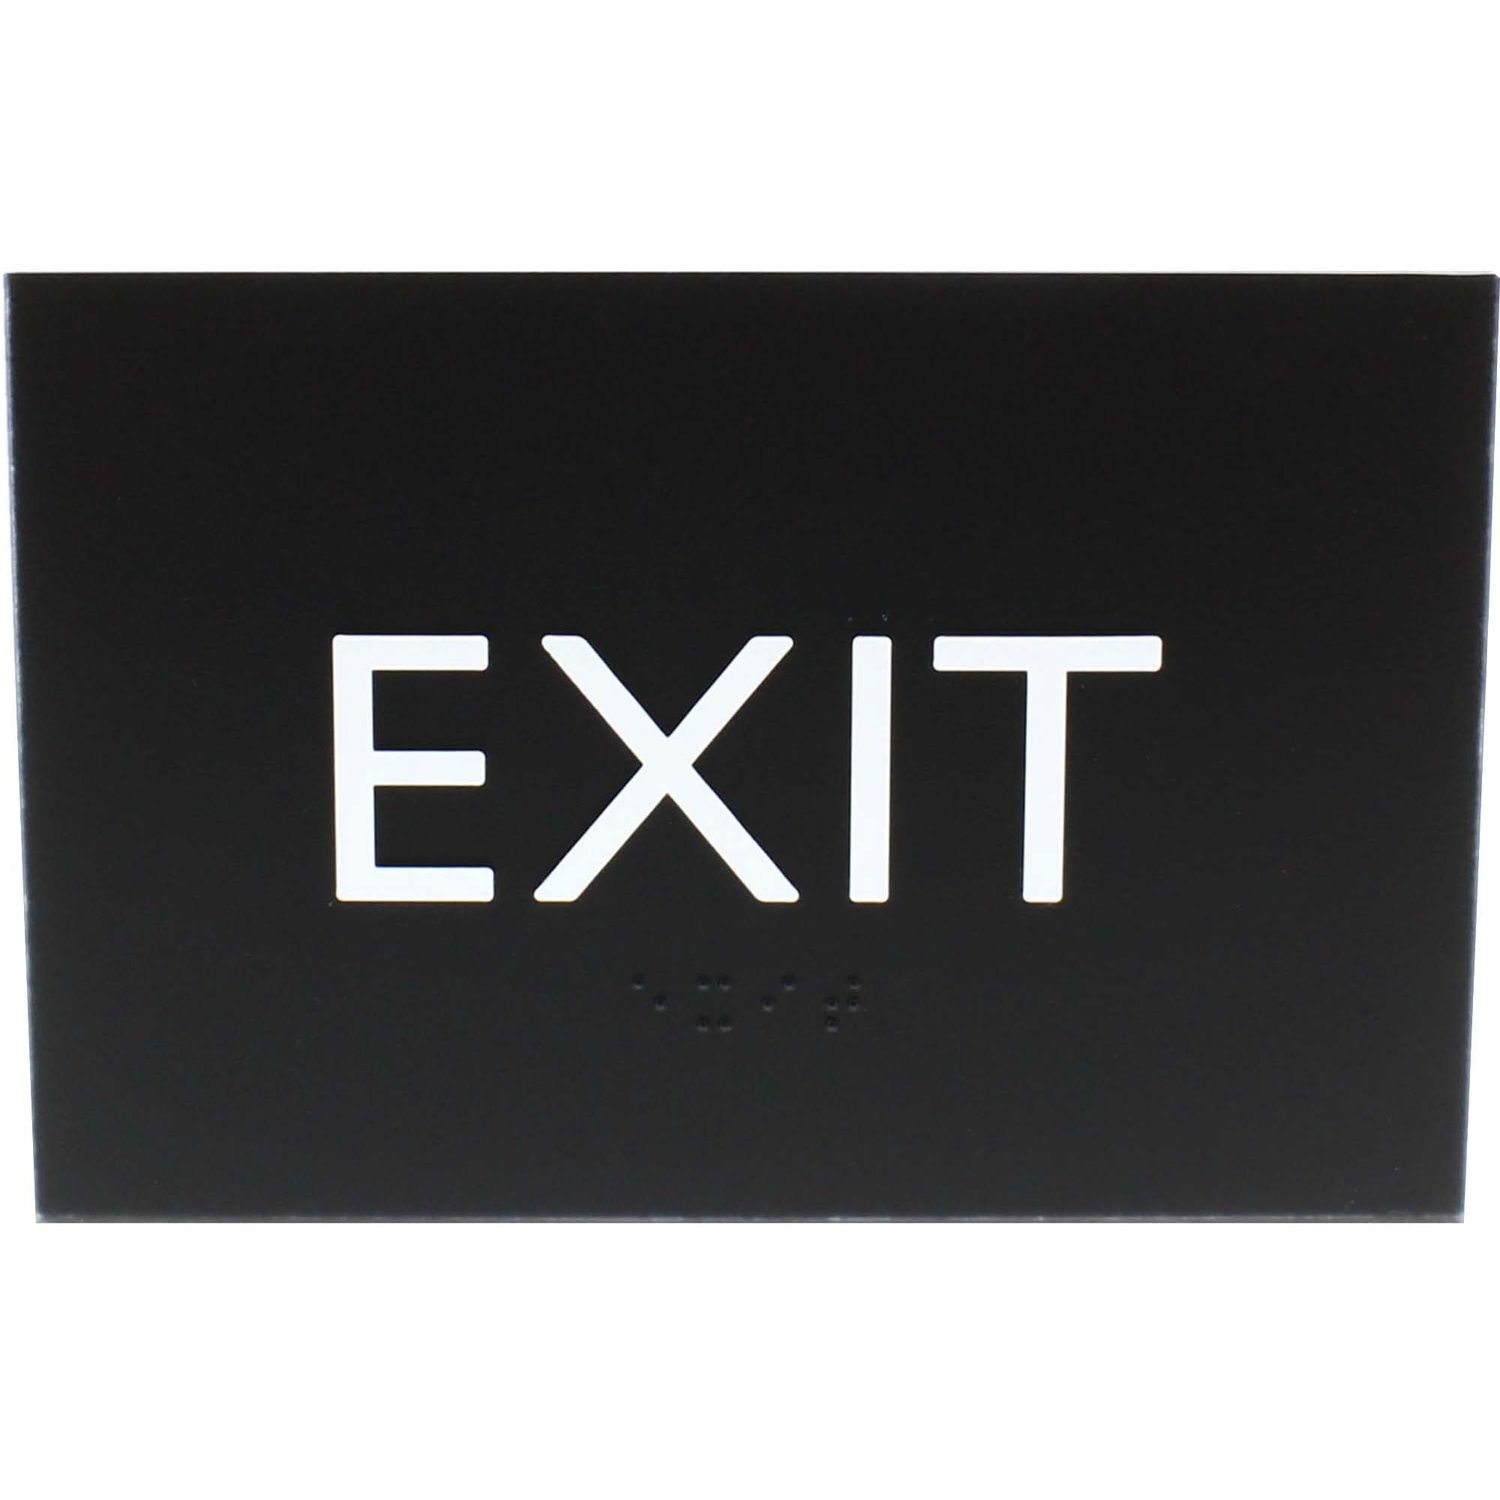 Exit Sign 1 Each, 4.5" Width x 6.8" Height, Rectangular Shape, Easy Readability, Braille, Plastic, Black